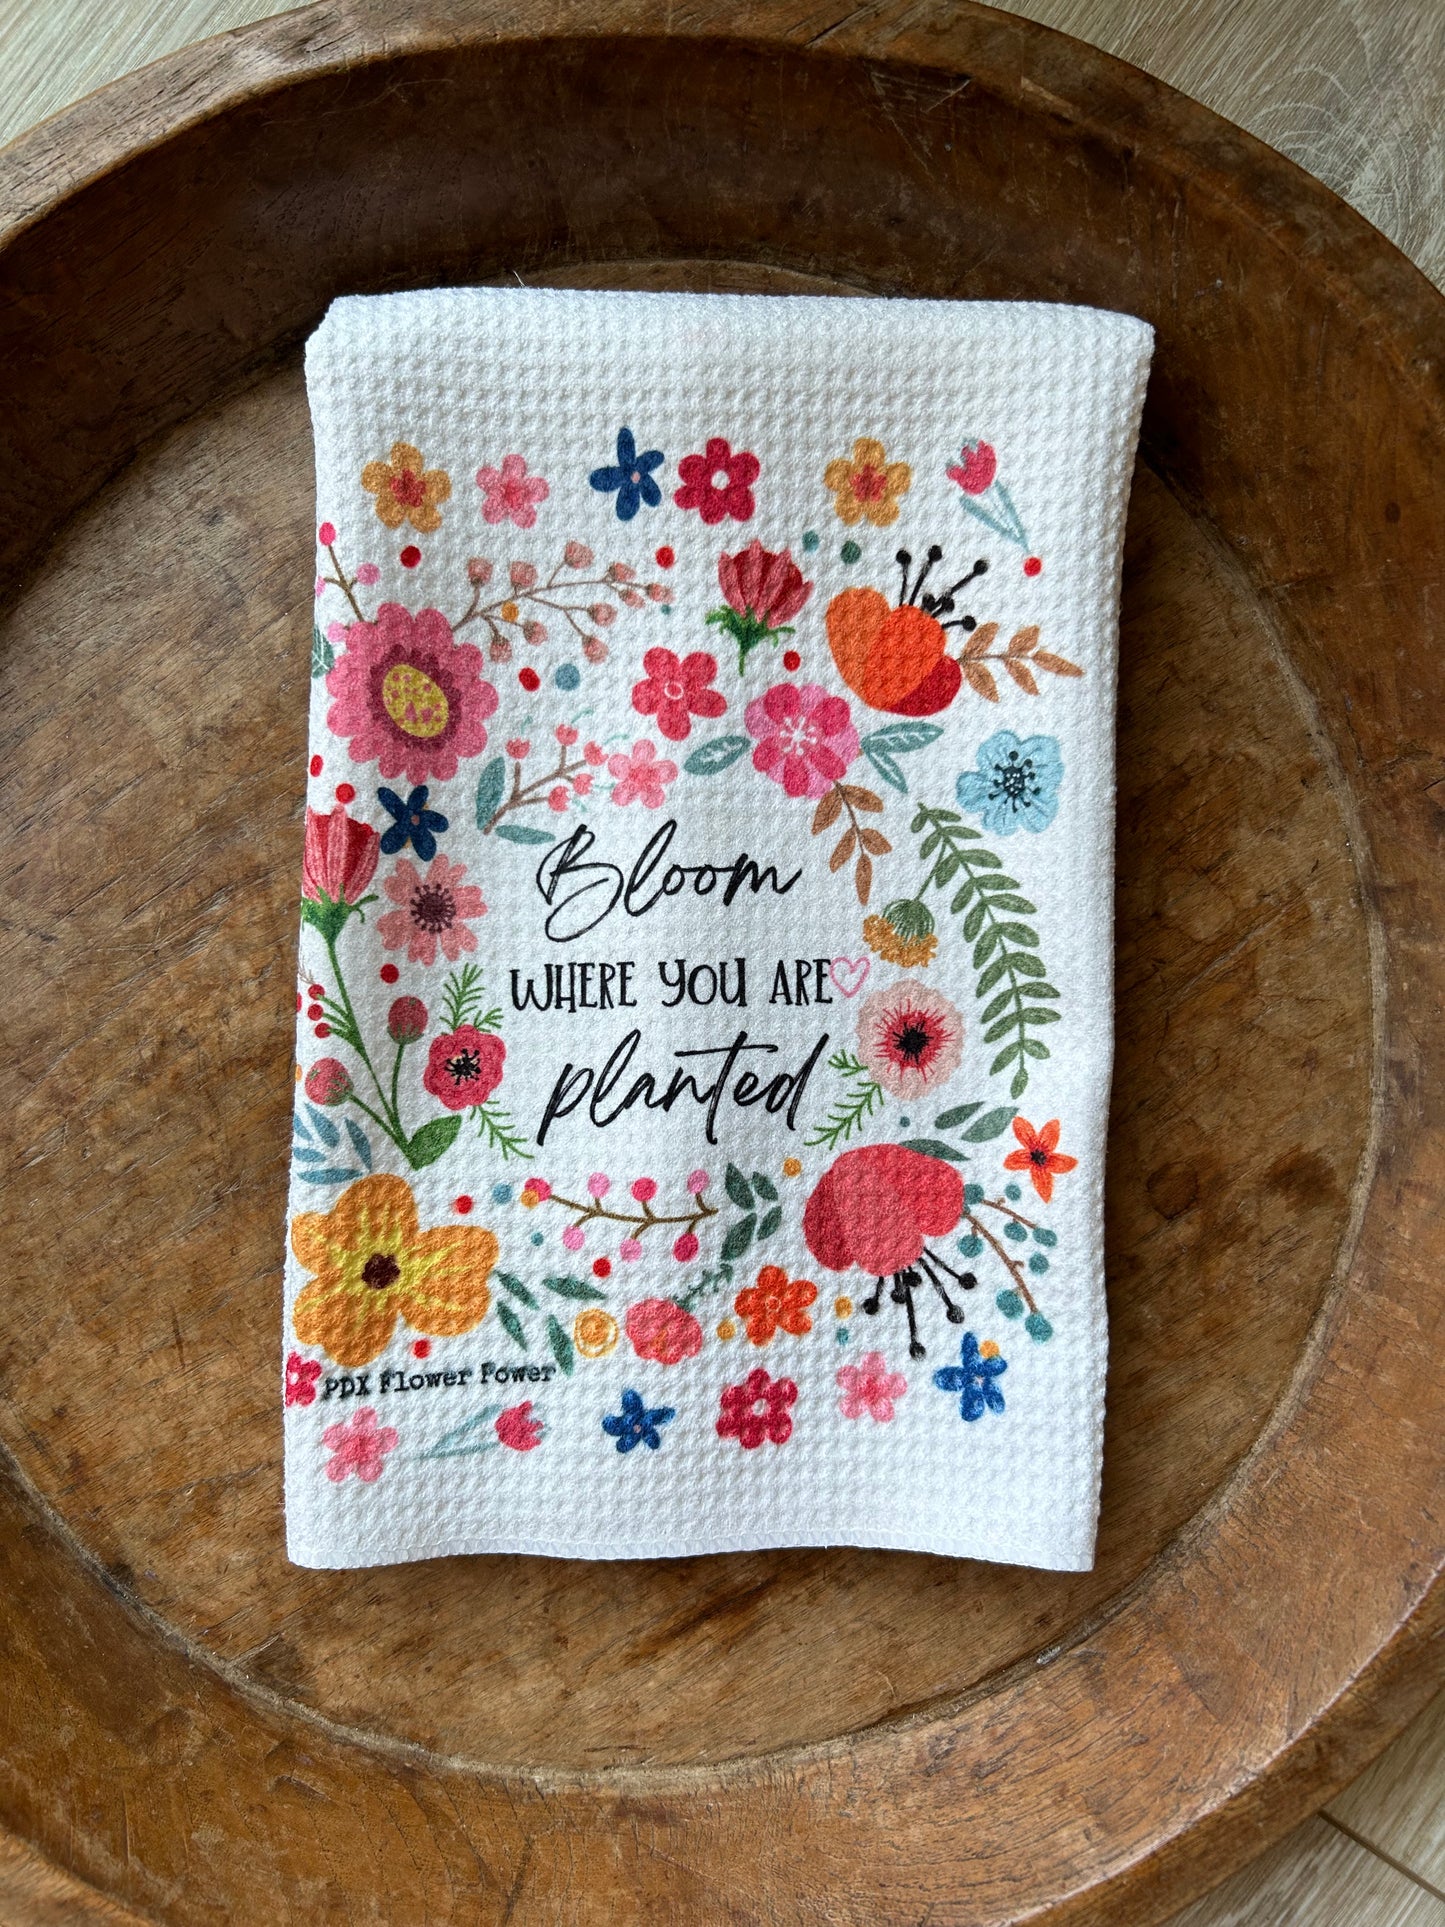 Bloom where you are planted waffle weave towel. Fun and functional towel, gifts for gardeners